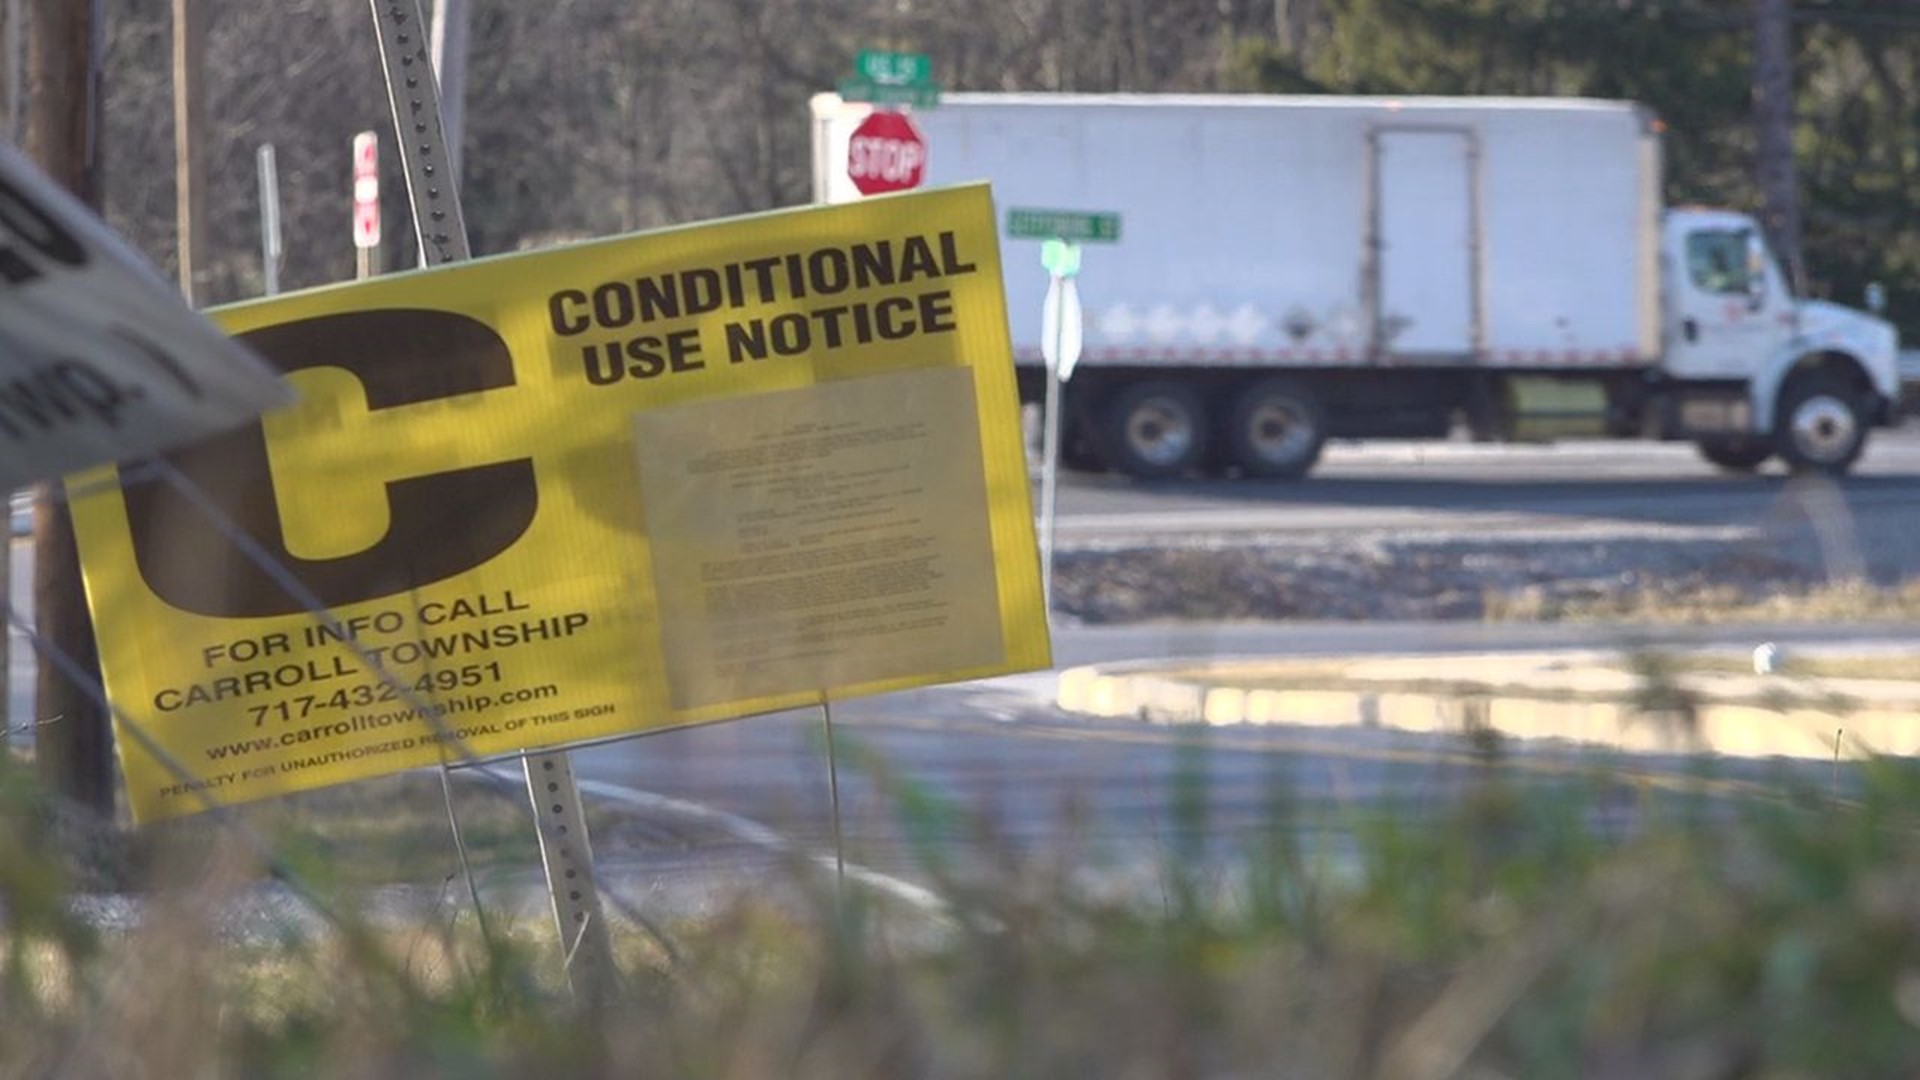 Developers withdrew an application for a Logistics Center along Route 15 in Carroll and Franklin Townships after a months-long standoff from neighbors.